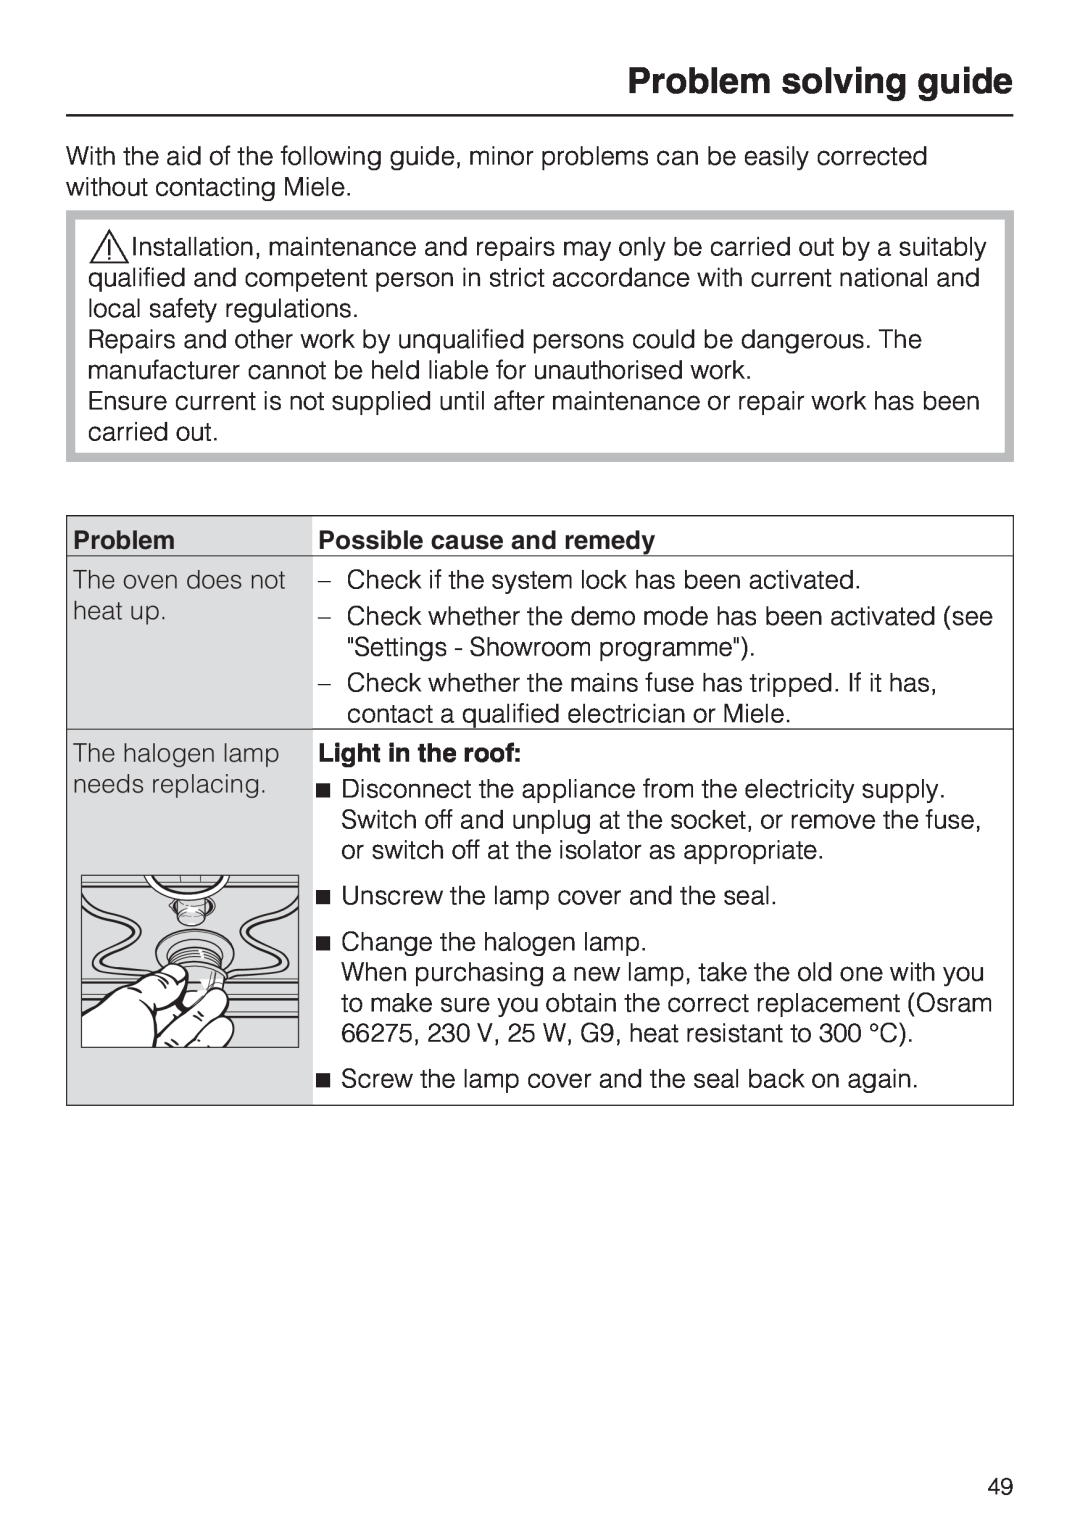 Miele H 5460-BP installation instructions Problem solving guide, Possible cause and remedy, Light in the roof 